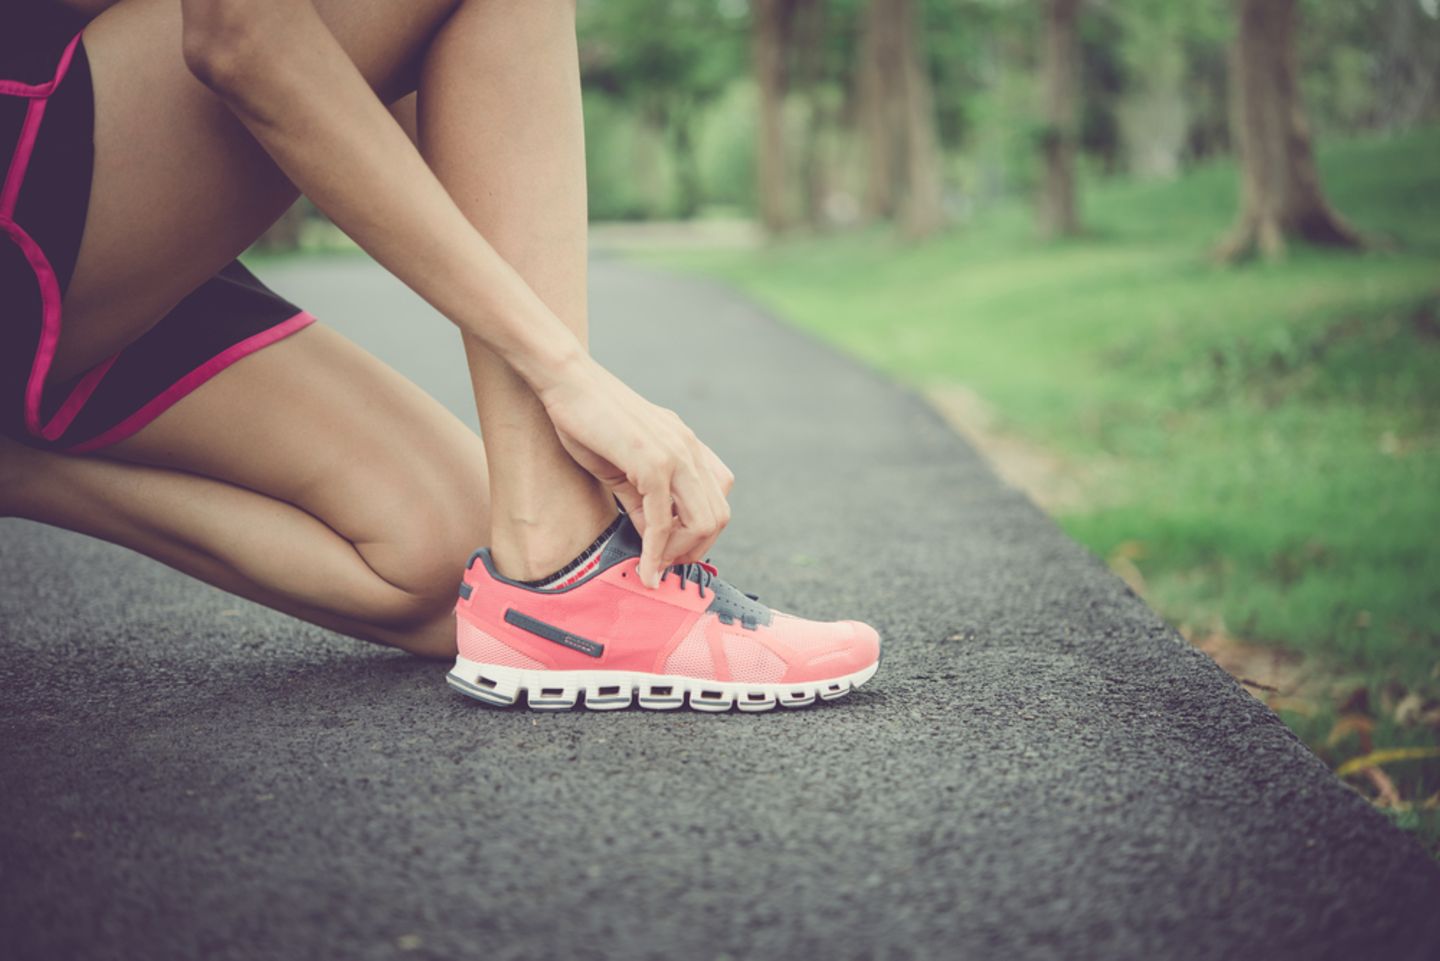 Strengthen connective tissue: woman ties her running shoes